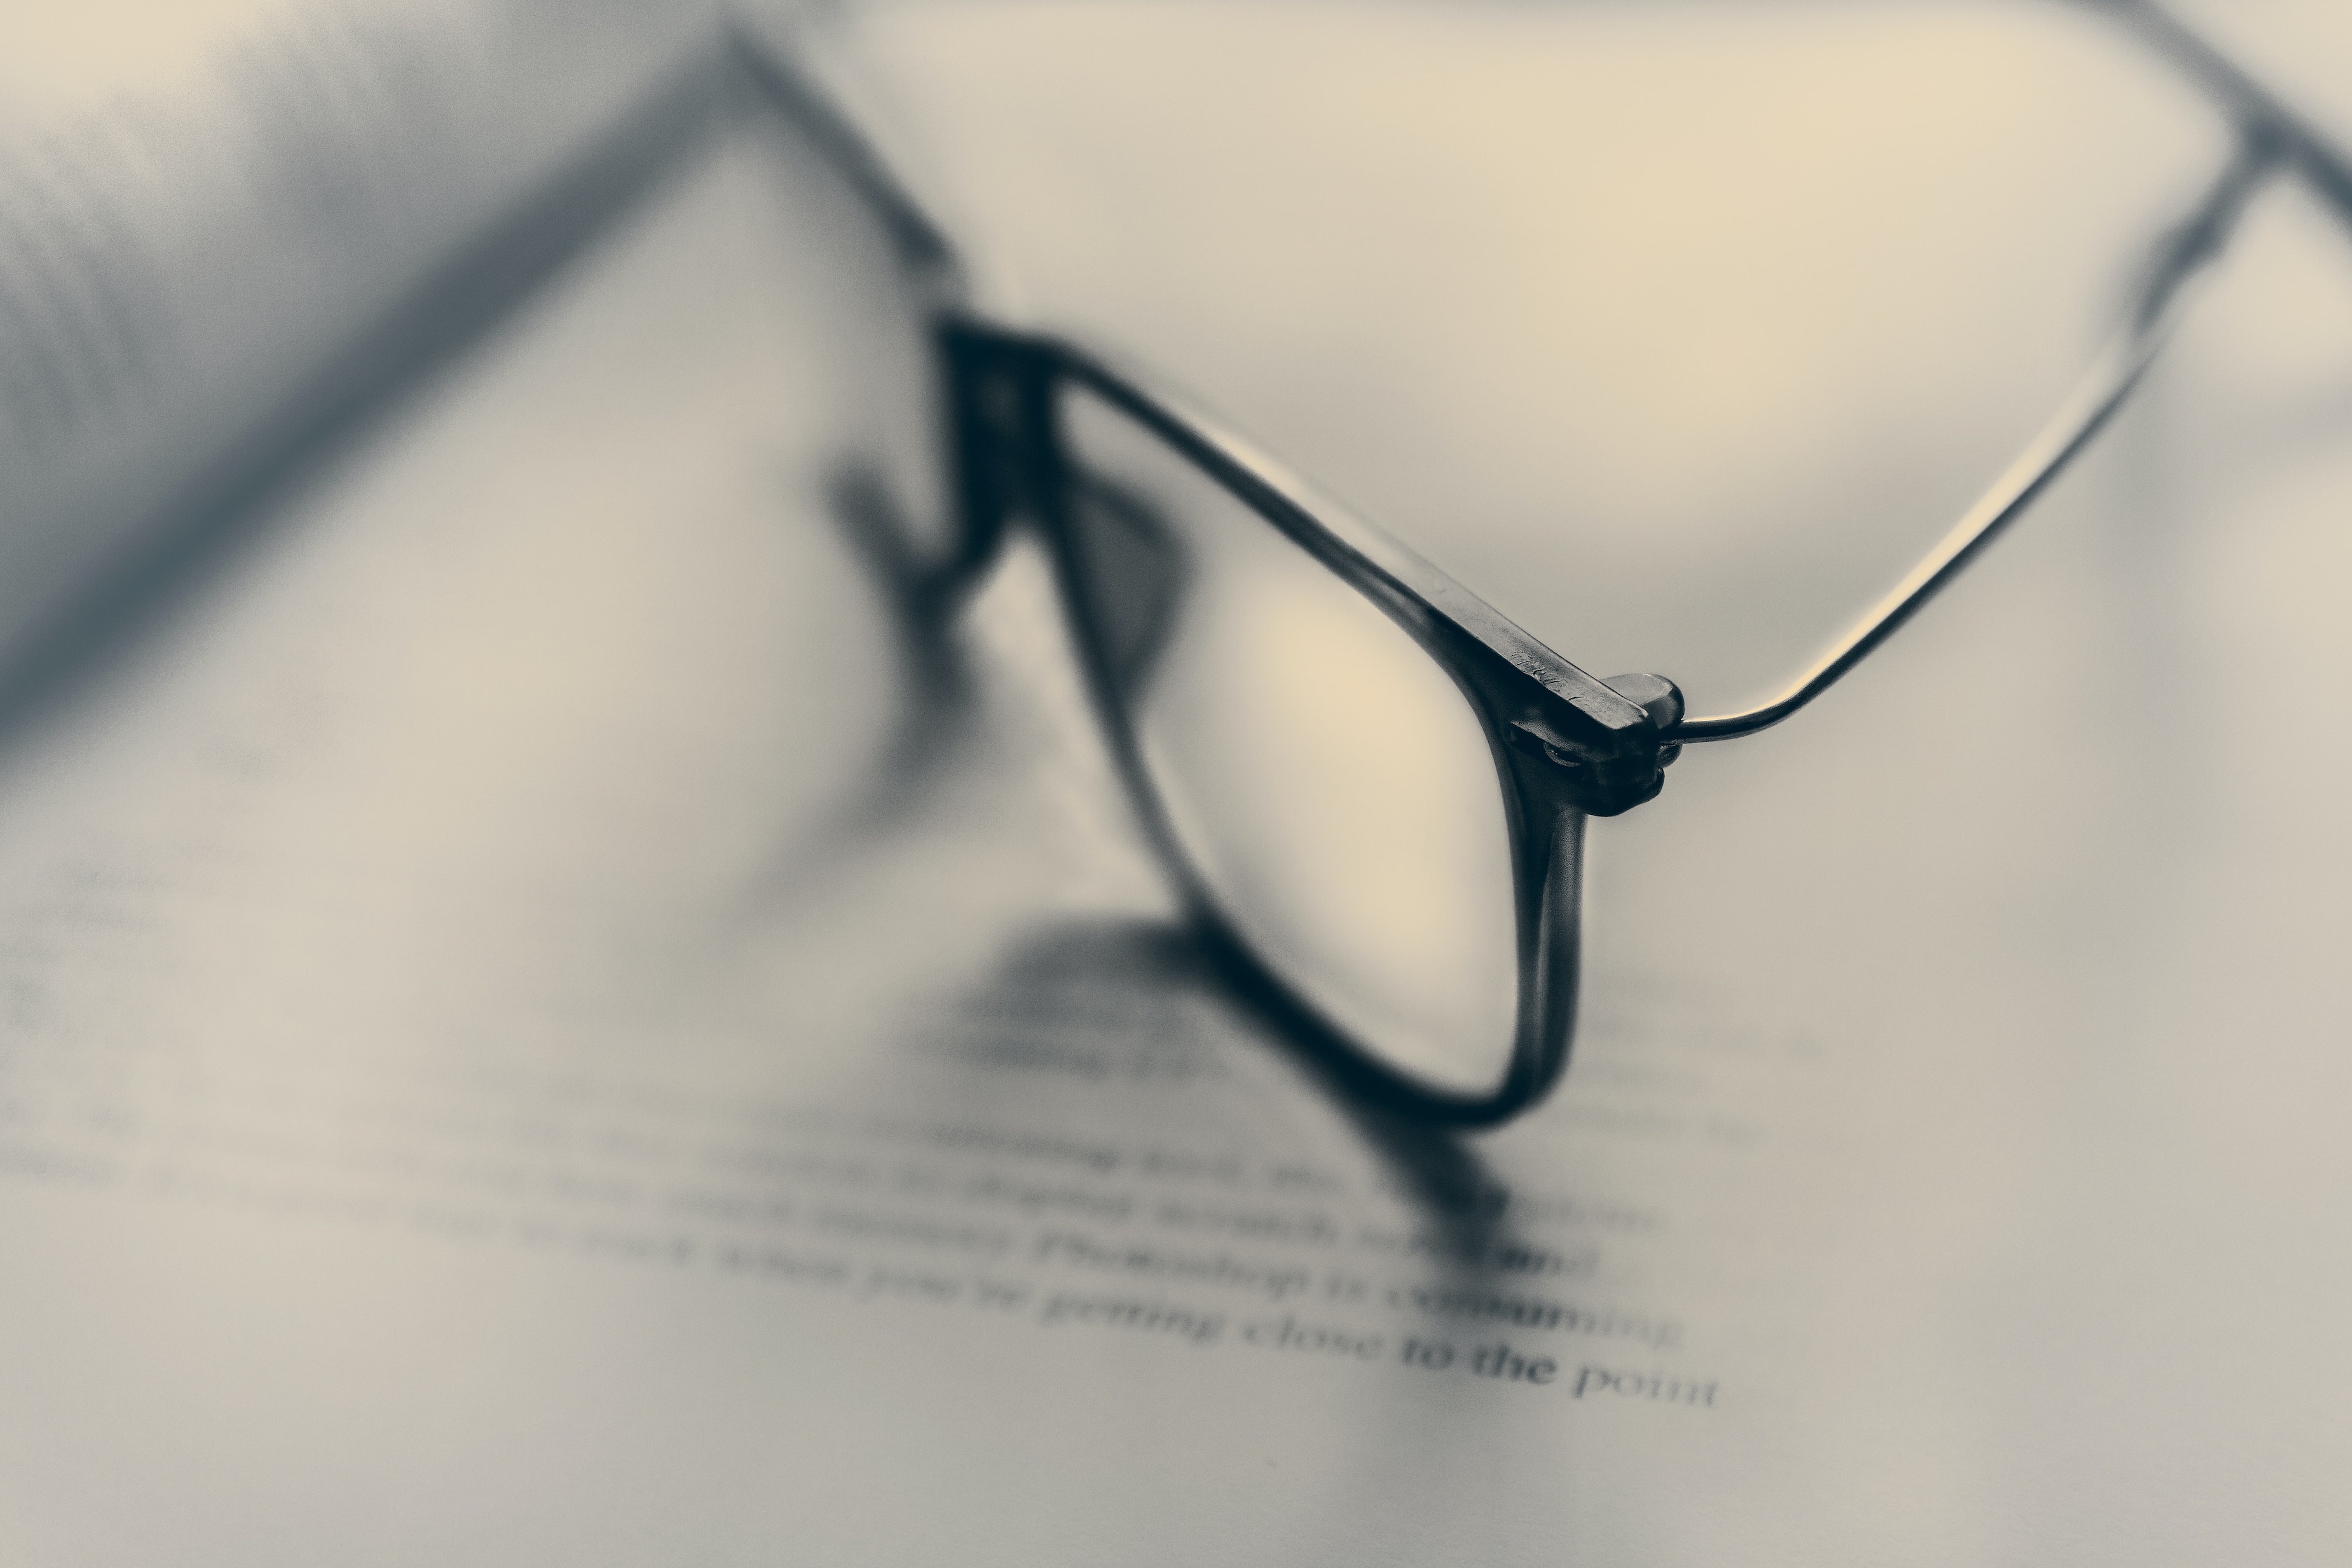 A blurred view with eyeglasses on a book. Text is unreadable, and the picture is grey-scaled.